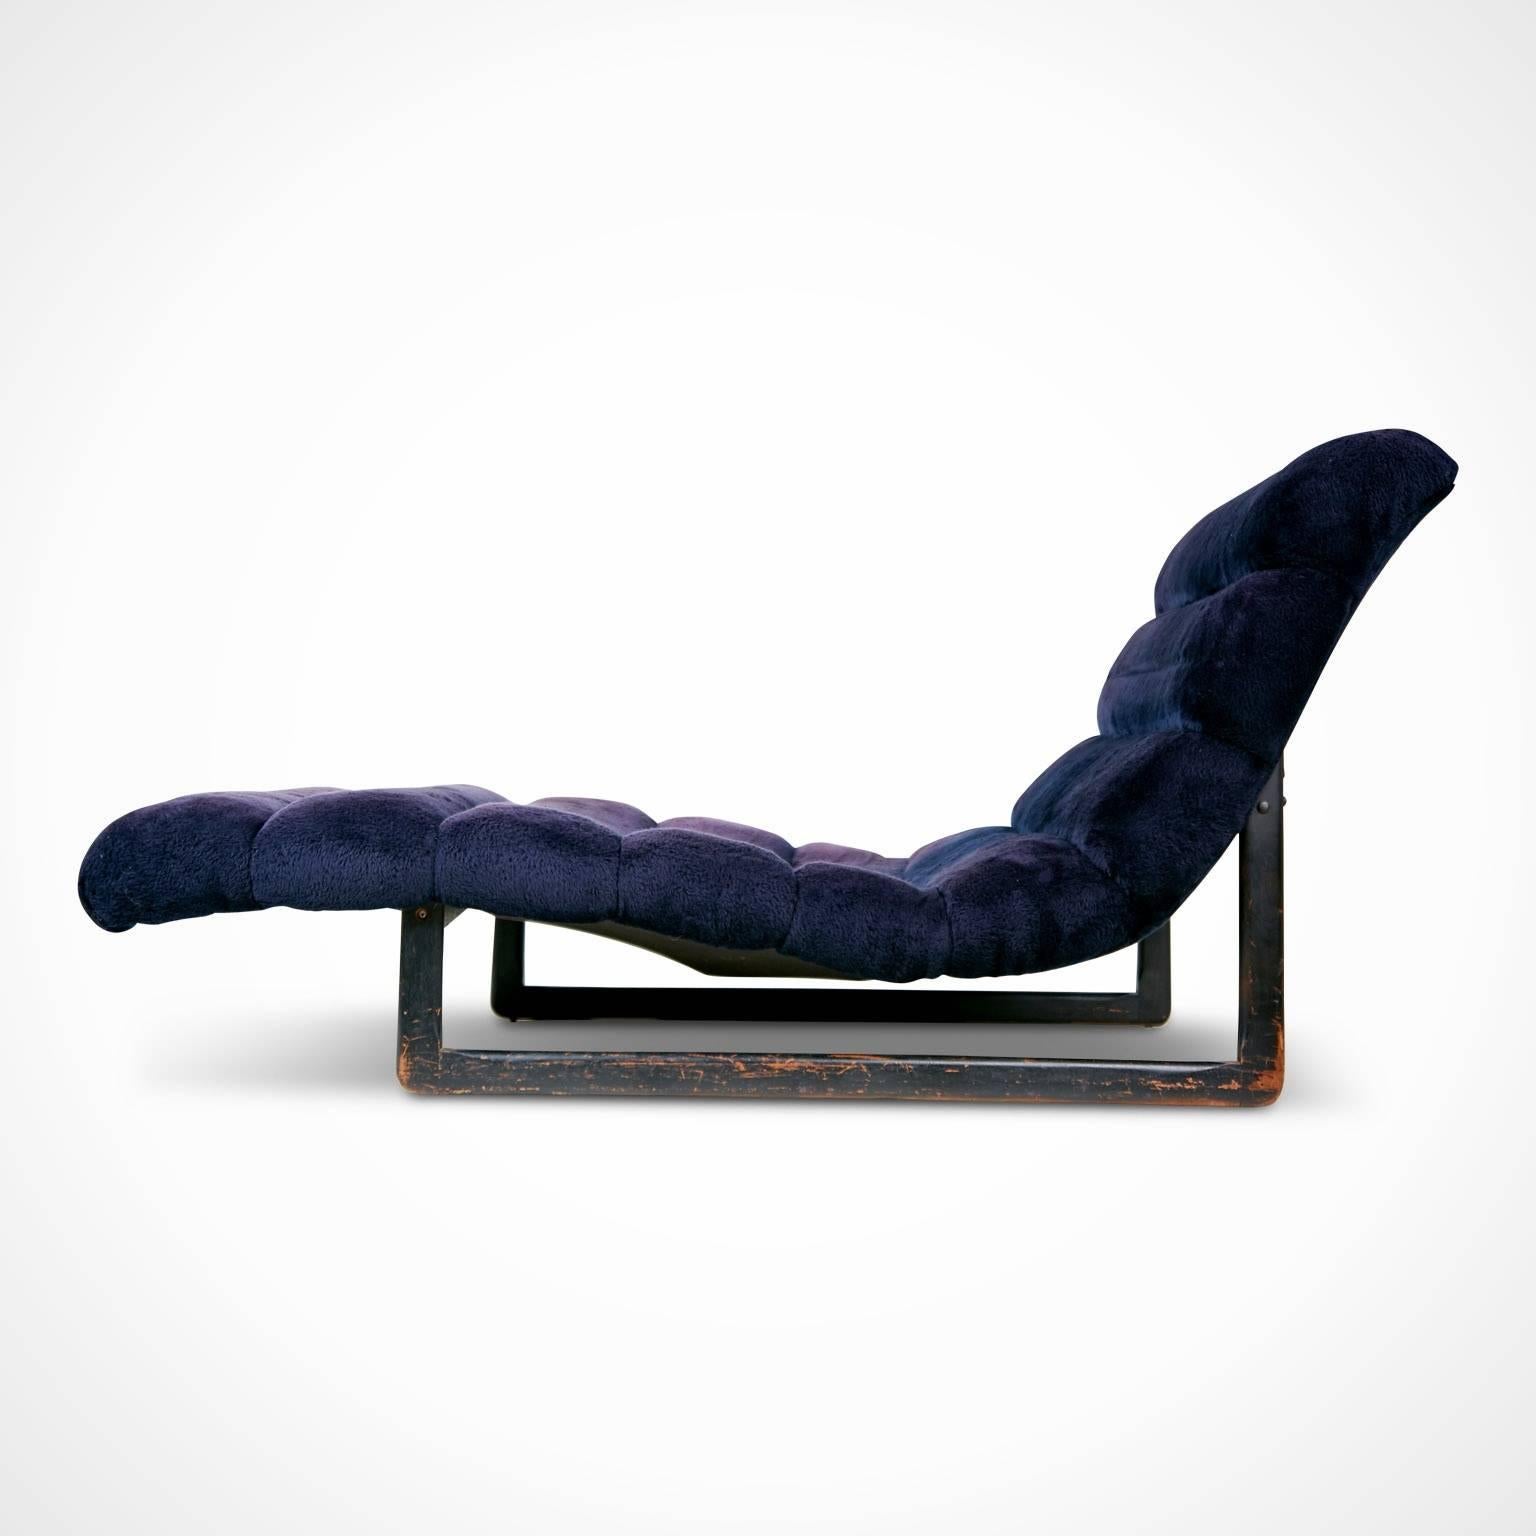 Mid-20th Century Adrian Pearsall Chaise Lounge for Craft Associates, circa 1960